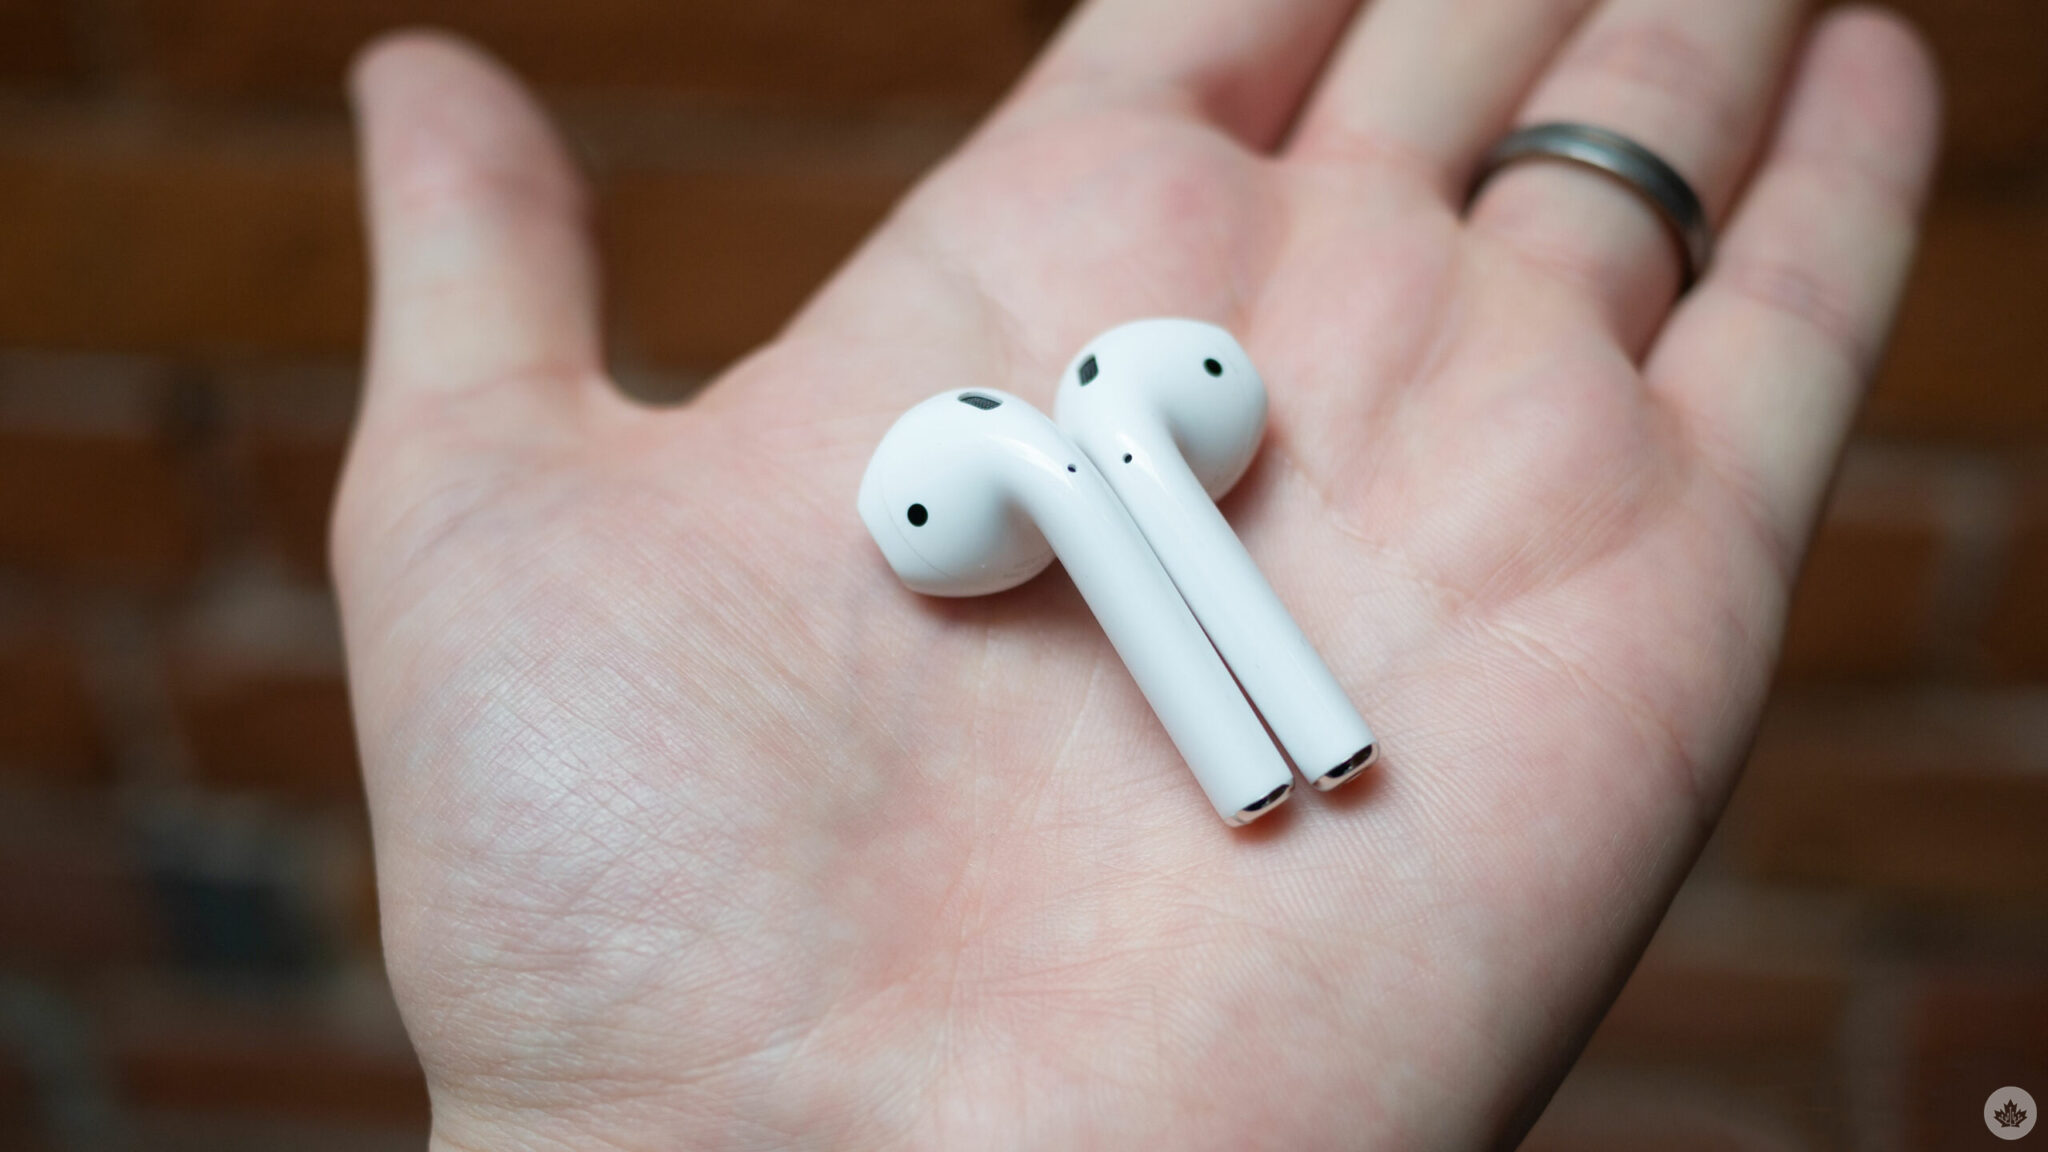 Buy an iPhone 12 at Koodo, get 2nd-gen AirPods for free